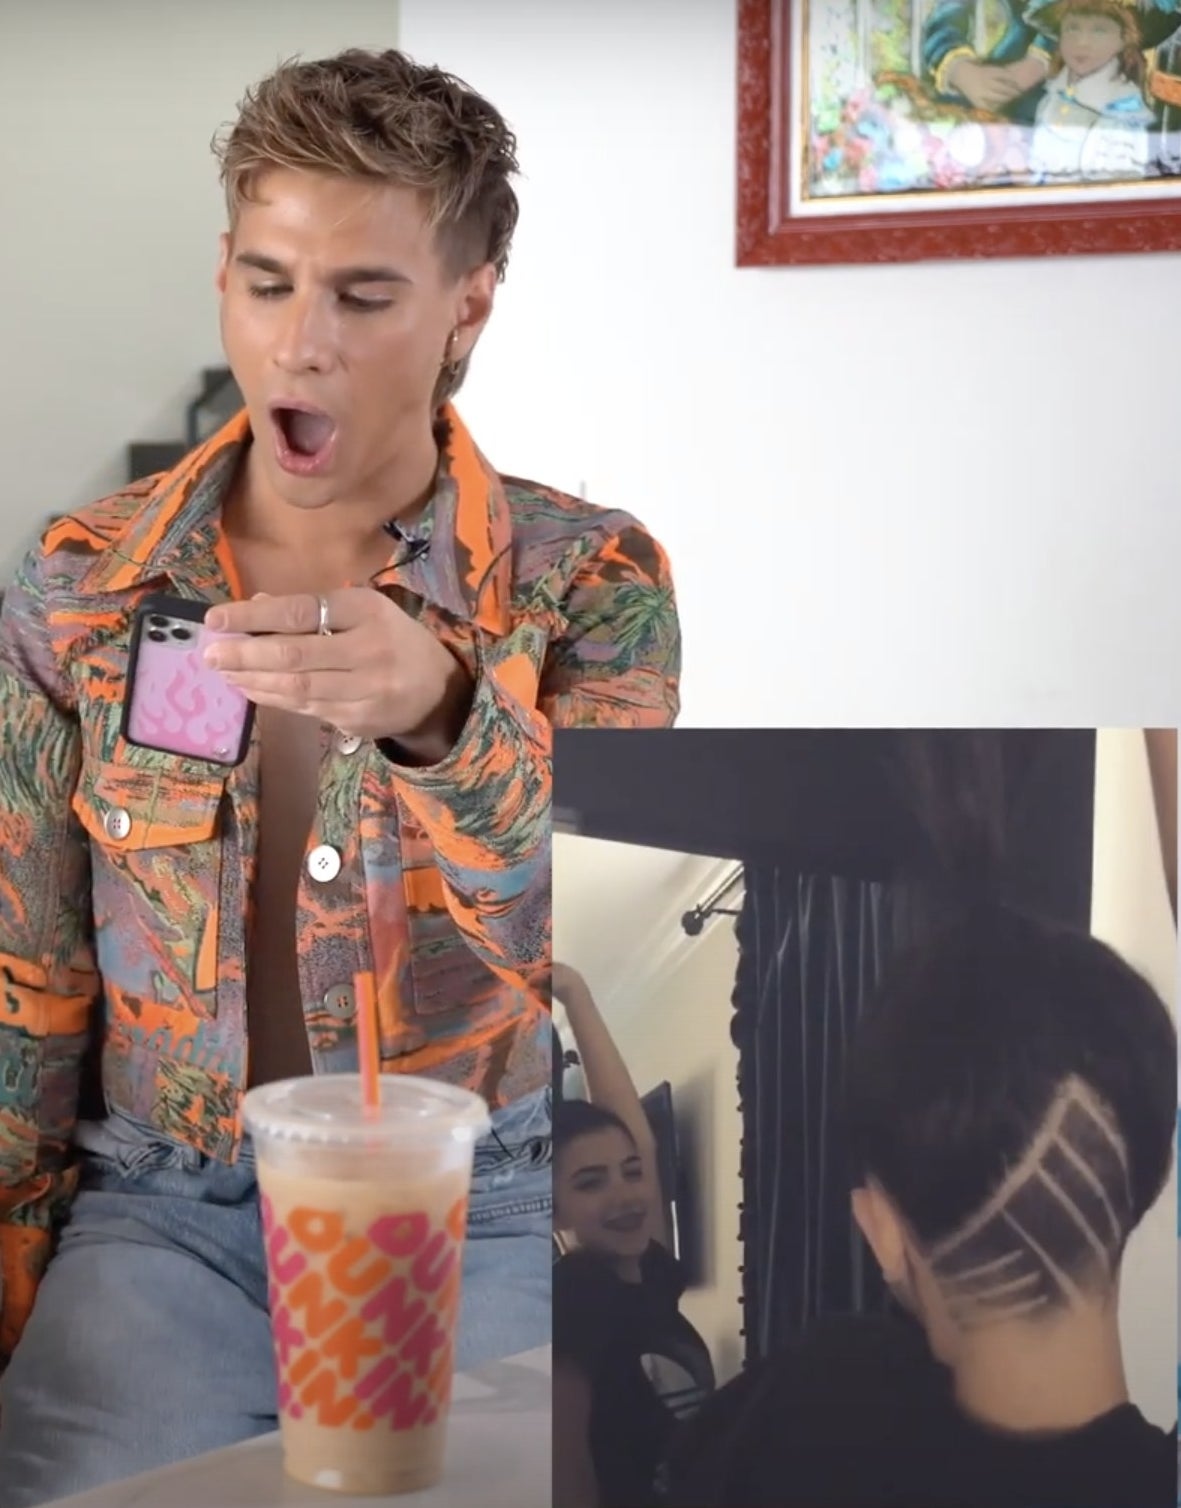 Brad gasps at a photo of Charli with a partially shaved head 